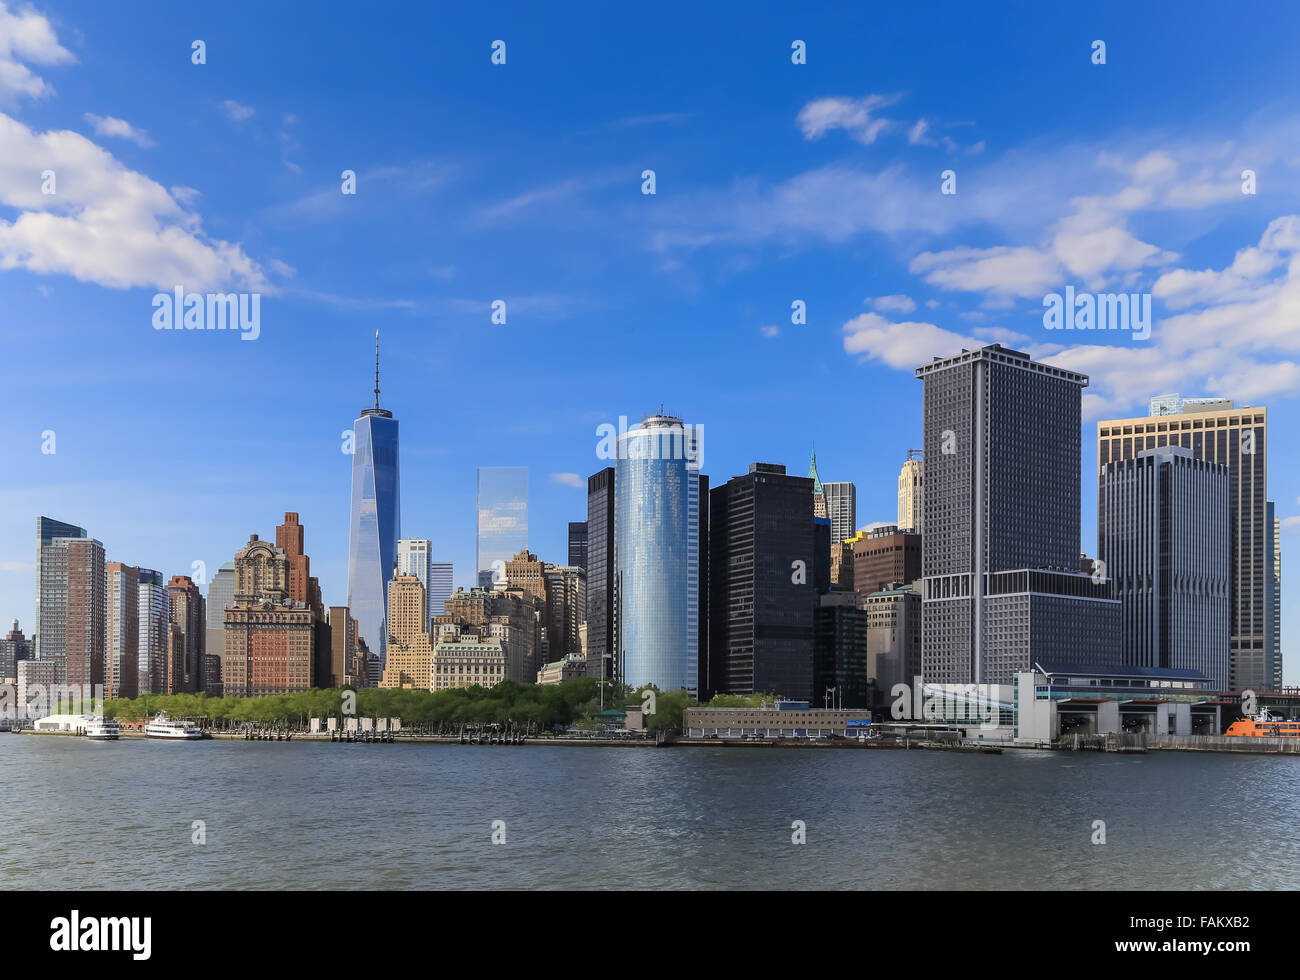 It's a view of Manhattan, New York City during the sunny day with a blue sky and riverside. There are many important building an Stock Photo